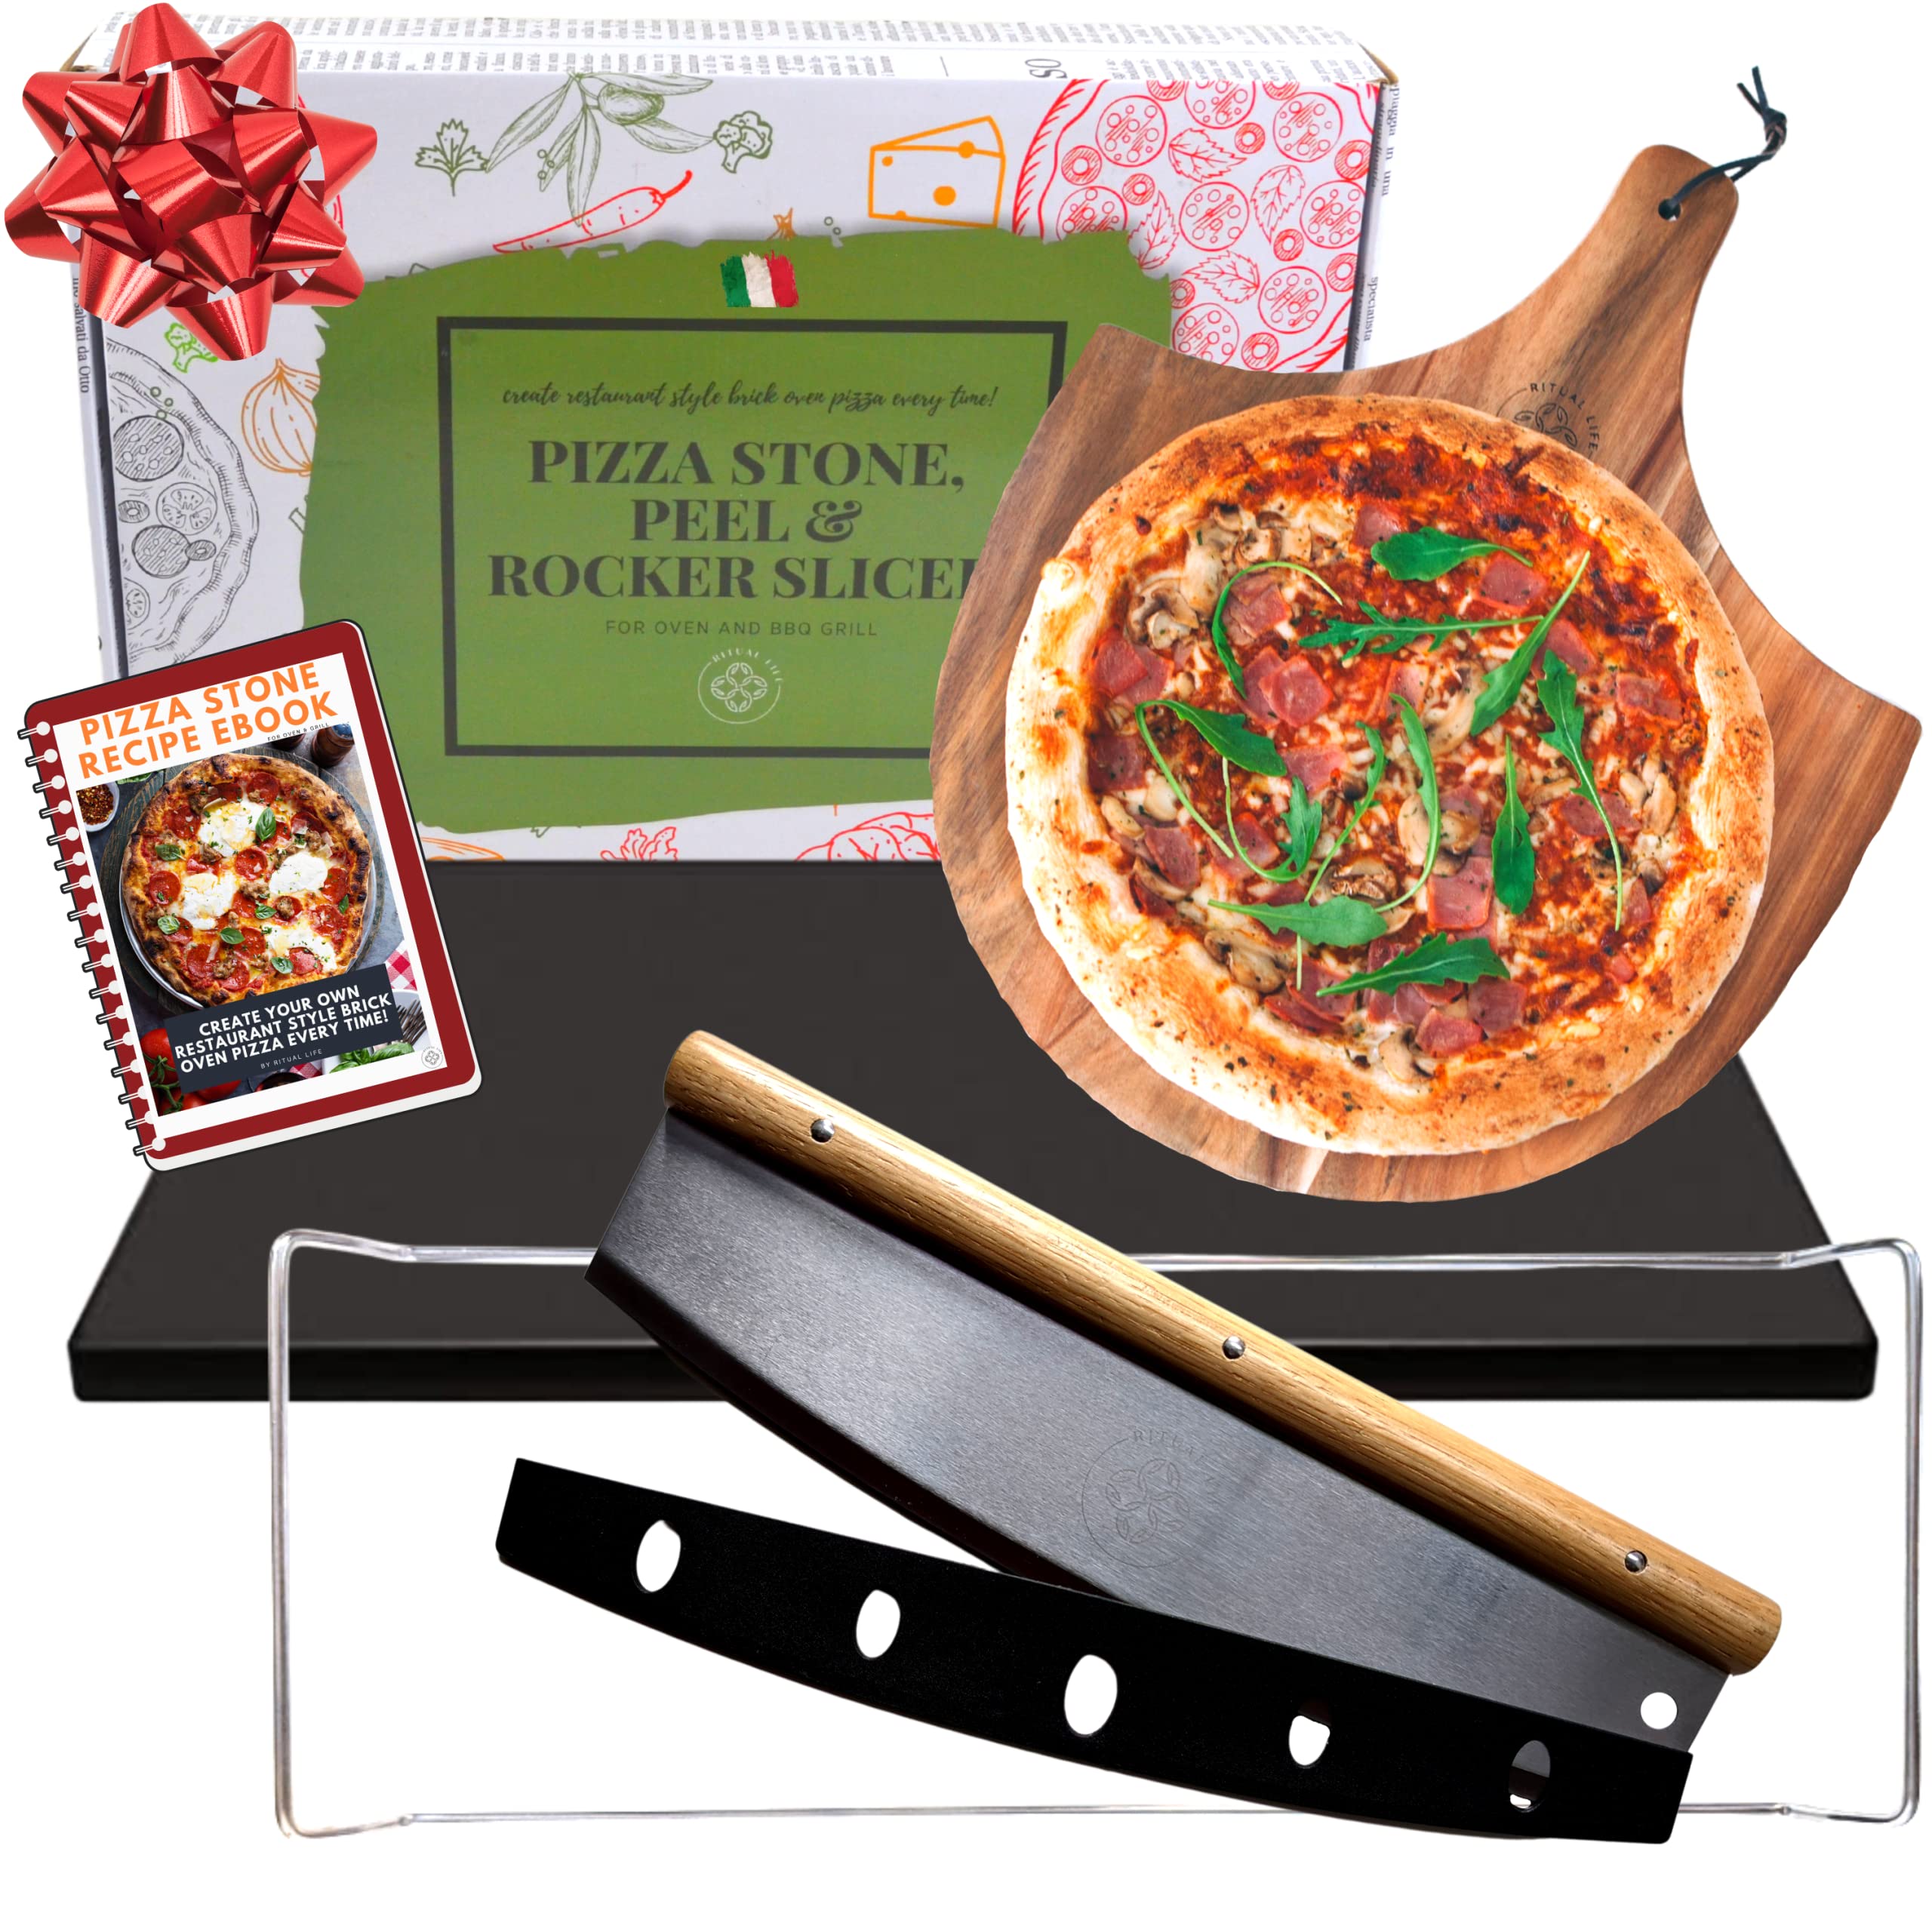 Advanced Pizza Stone for Oven and Grill